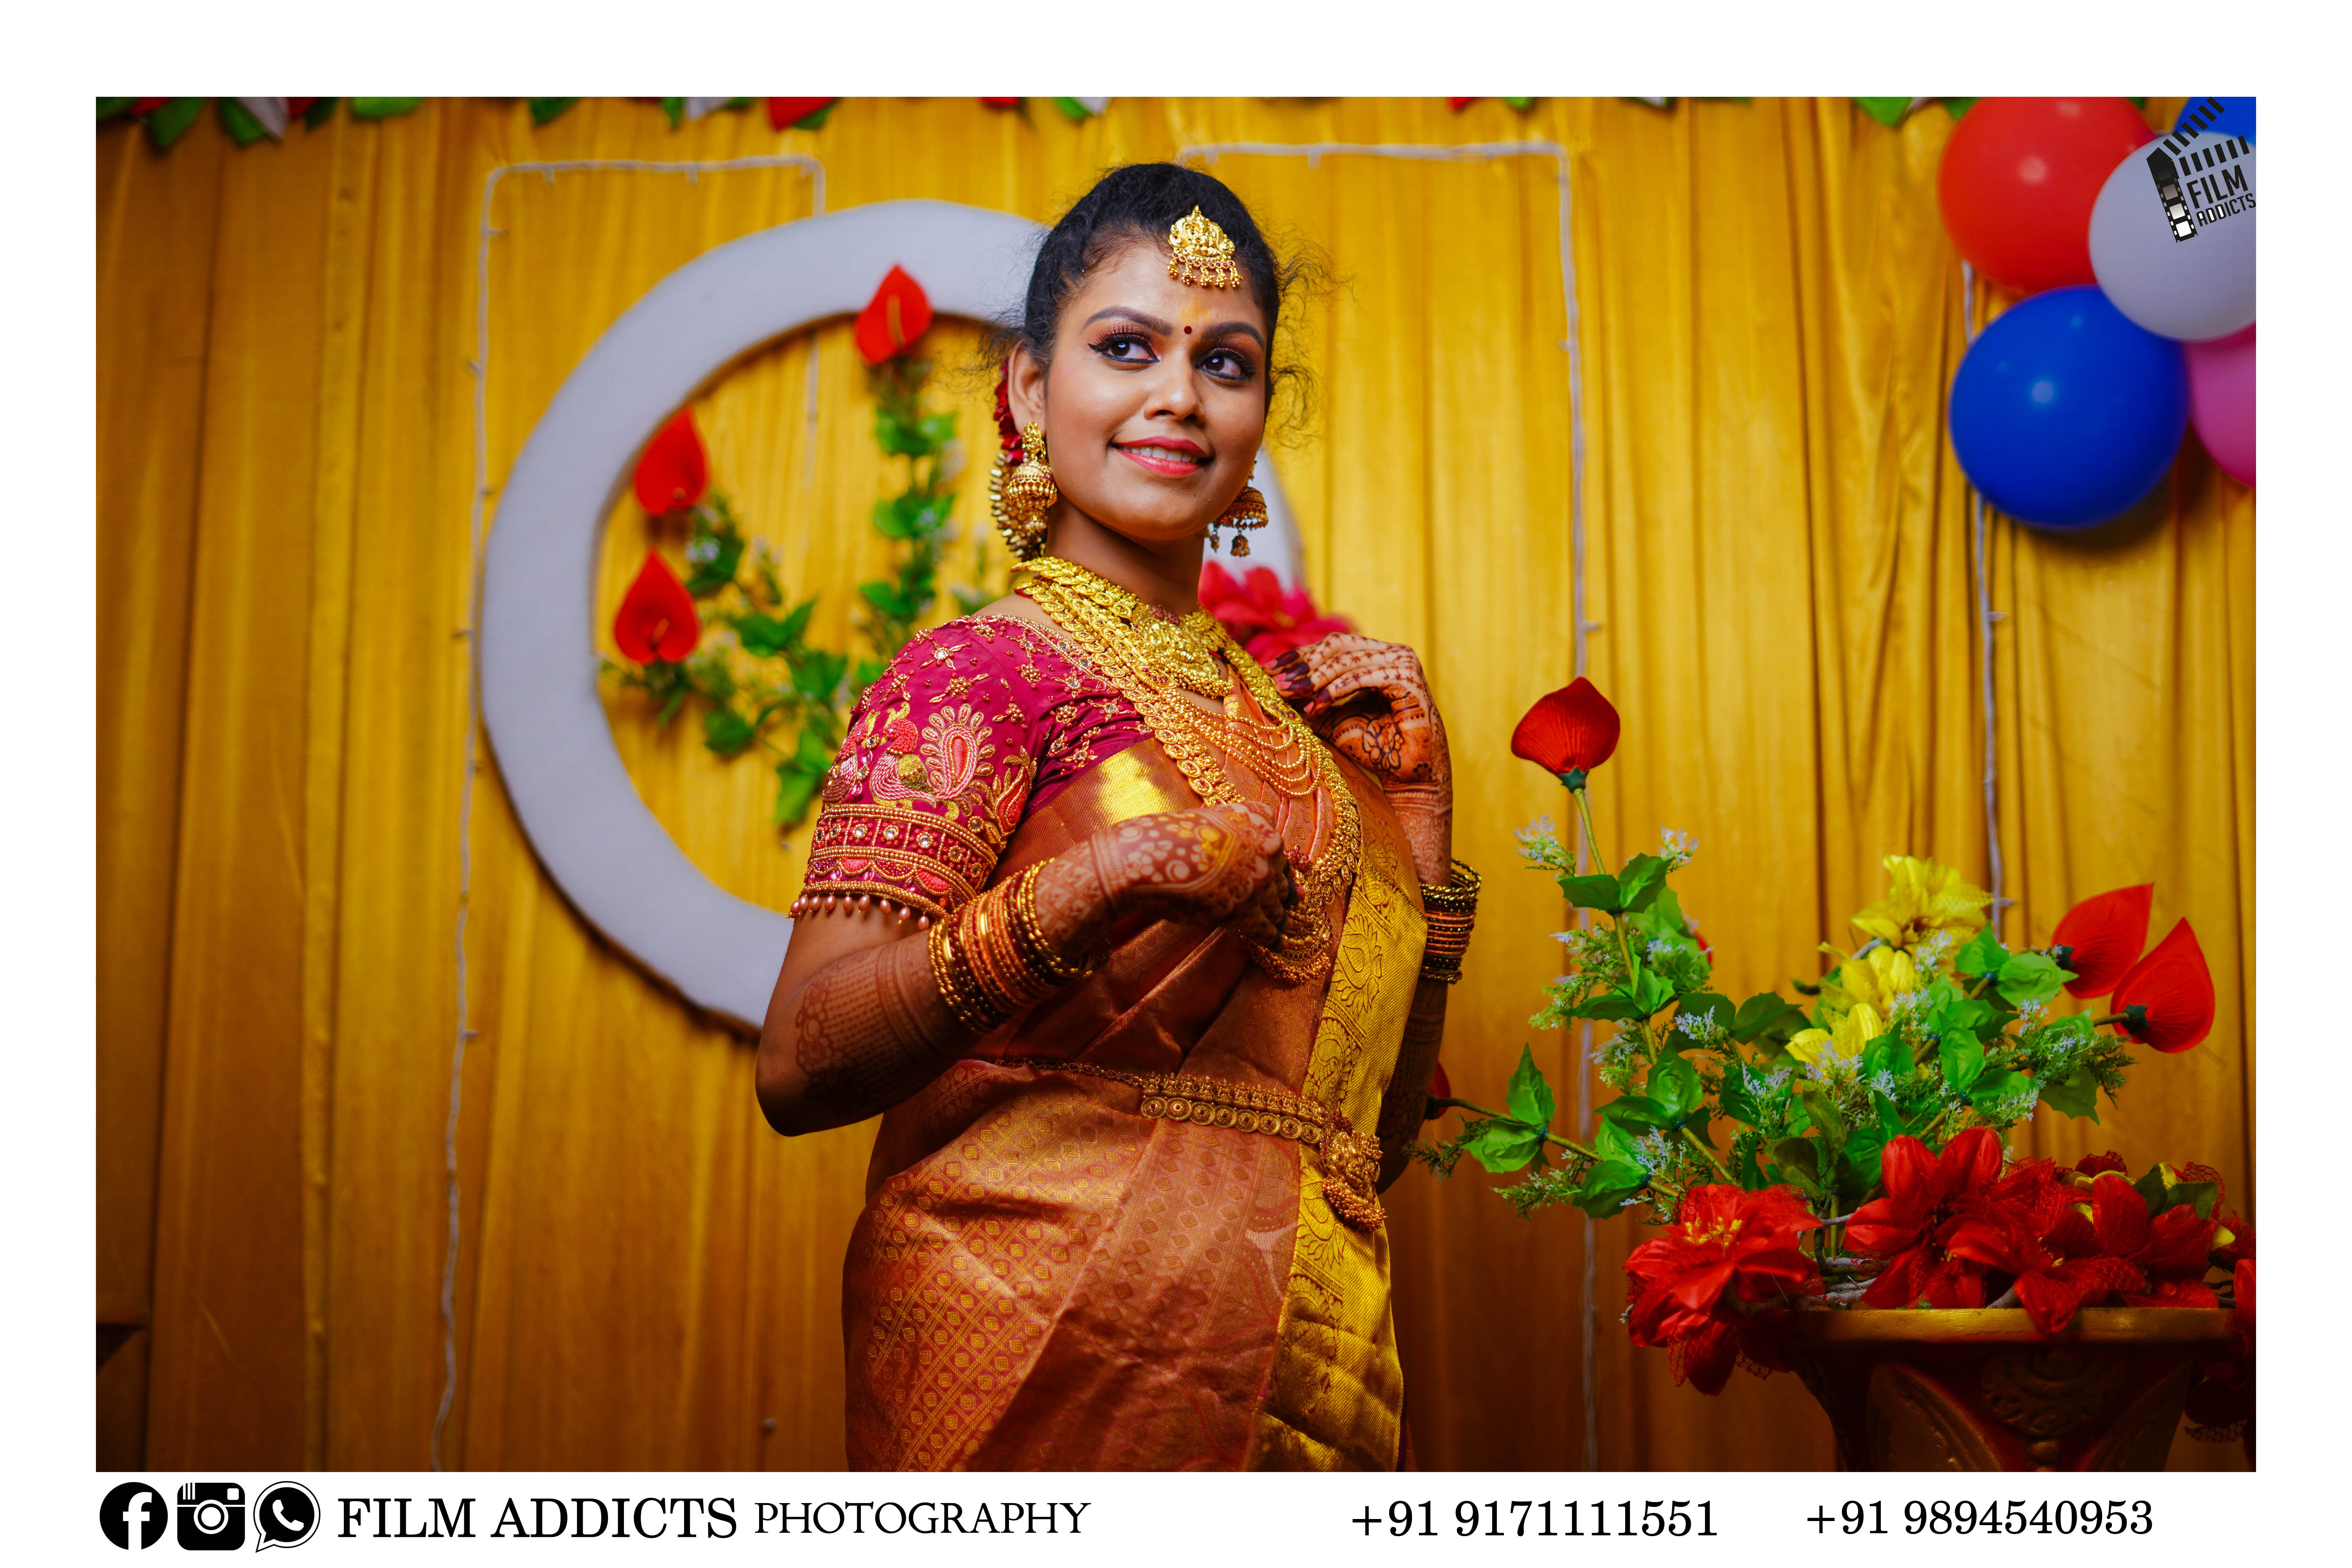 Best Puberty Photography in Madurai-FilmAddicts Photography, Best Wedding Candid photographers in Theni,  Wedding Candid Moments FilmAddicts, Photography FilmAddictsPhotography, best wedding in Theni, Best Candid-shoot in Theni, best moment, Best wedding moments, Best wedding photography in Theni, Best wedding videography in Theni, Best couple shoot, Best candid, Best wedding shoot,  best marriage photographers in Theni, best marriage photography in Theni, best candid photography, best Theni photography, Theni photography, Theni couples, candid shoot, candid , tamilnadu wedding photography, best photographers in Theni, tamilnadu.